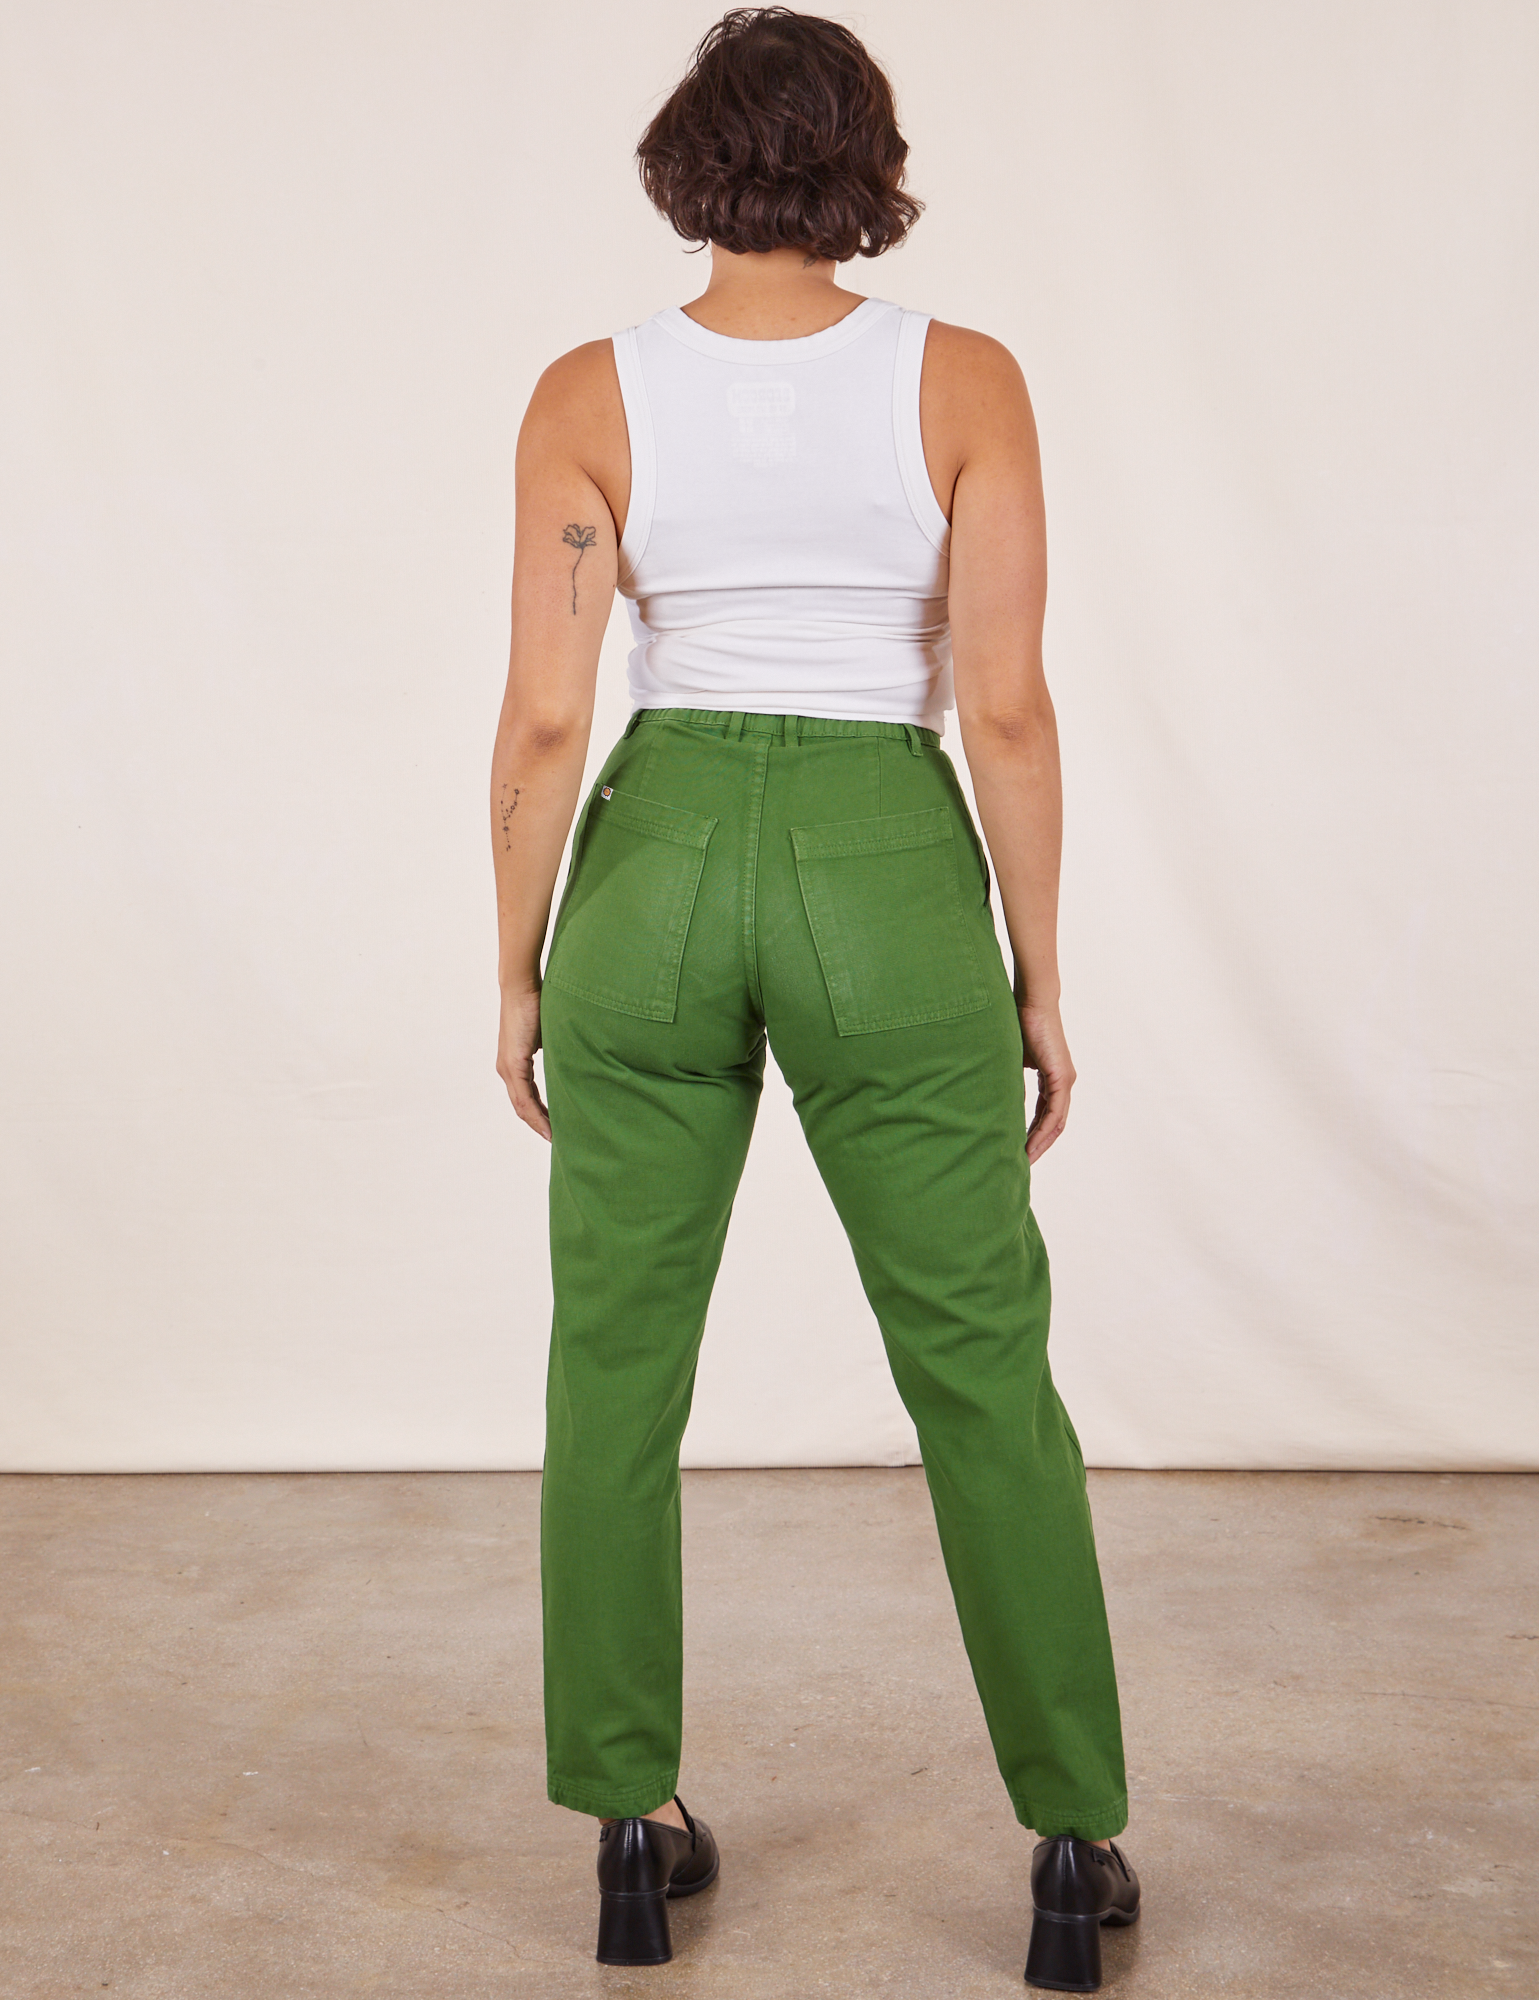 Back view of Pencil Pants in Lawn Green and Cropped Tank Top in vintage tee off-white on Tiara